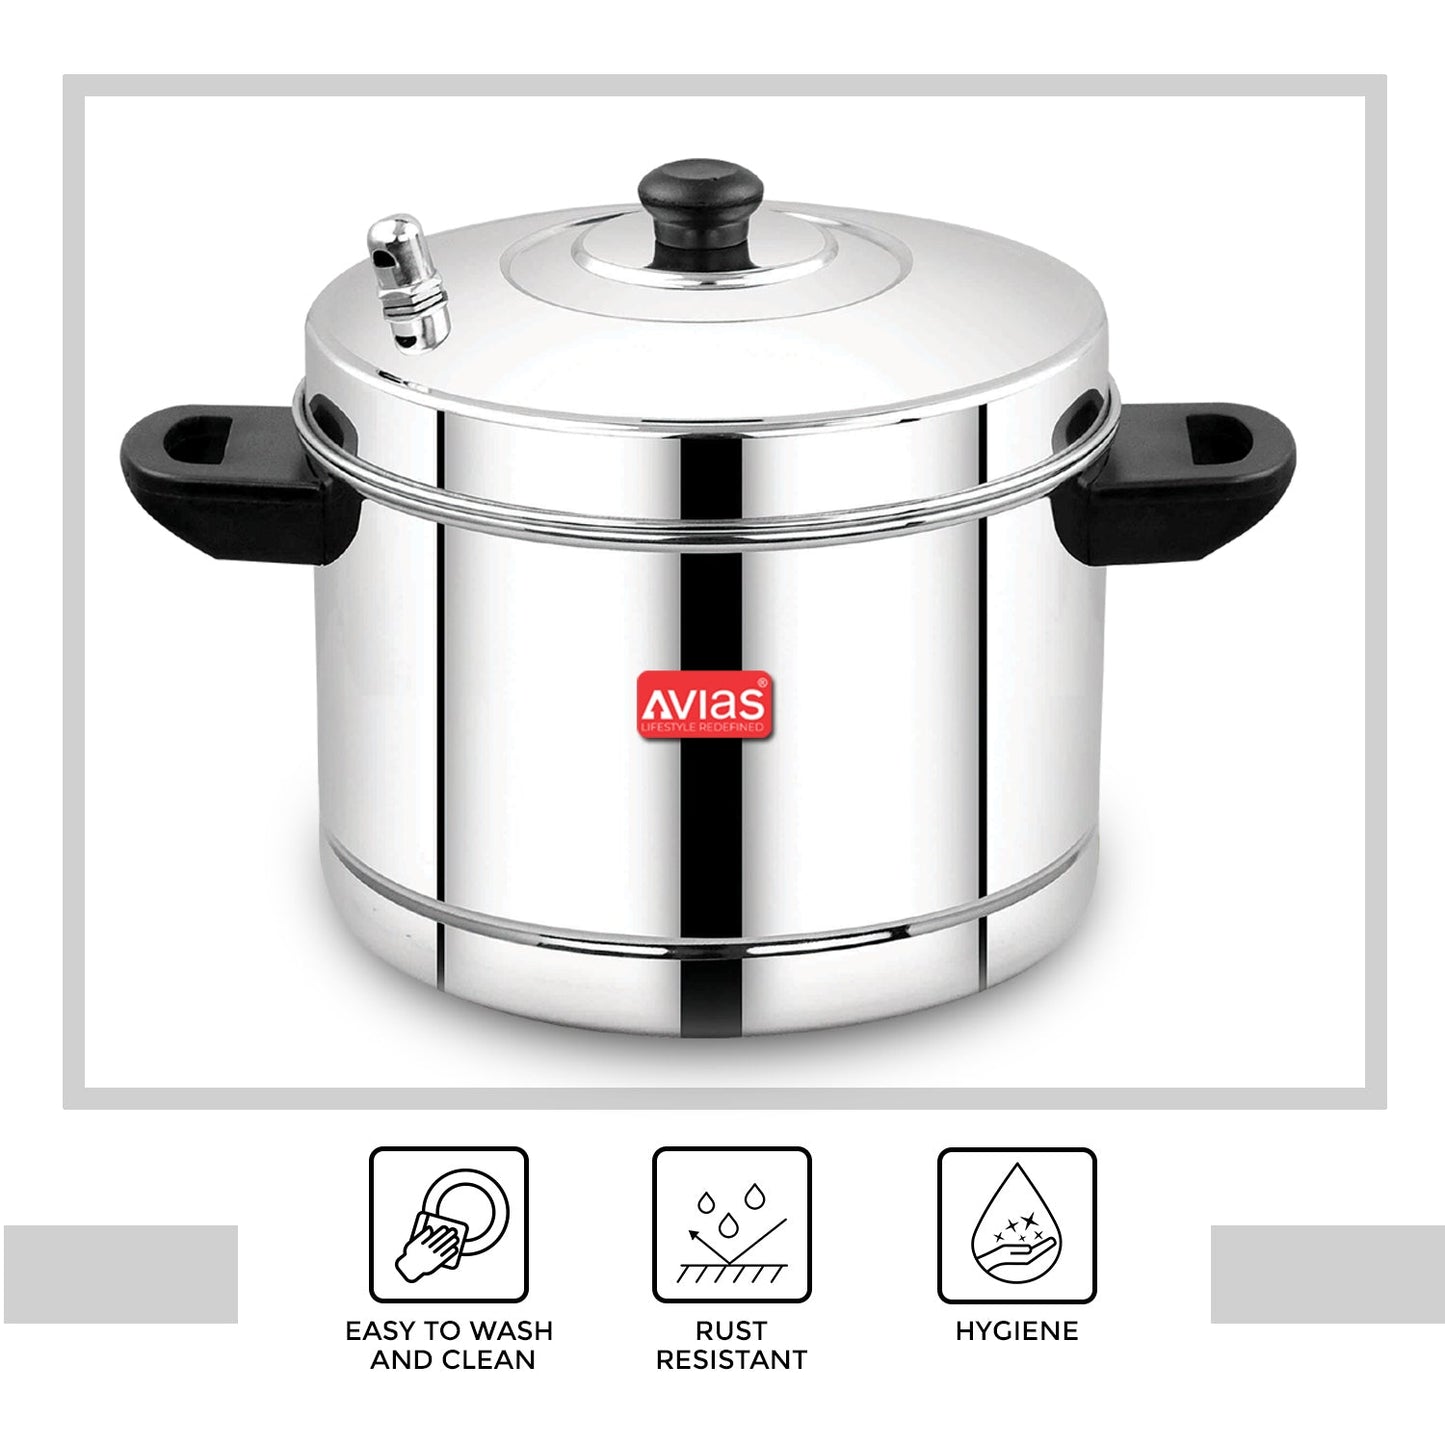 AVIAS Stainless Steel Idly Cooker | Induction And Gas Stove Base | 4 Plates-6